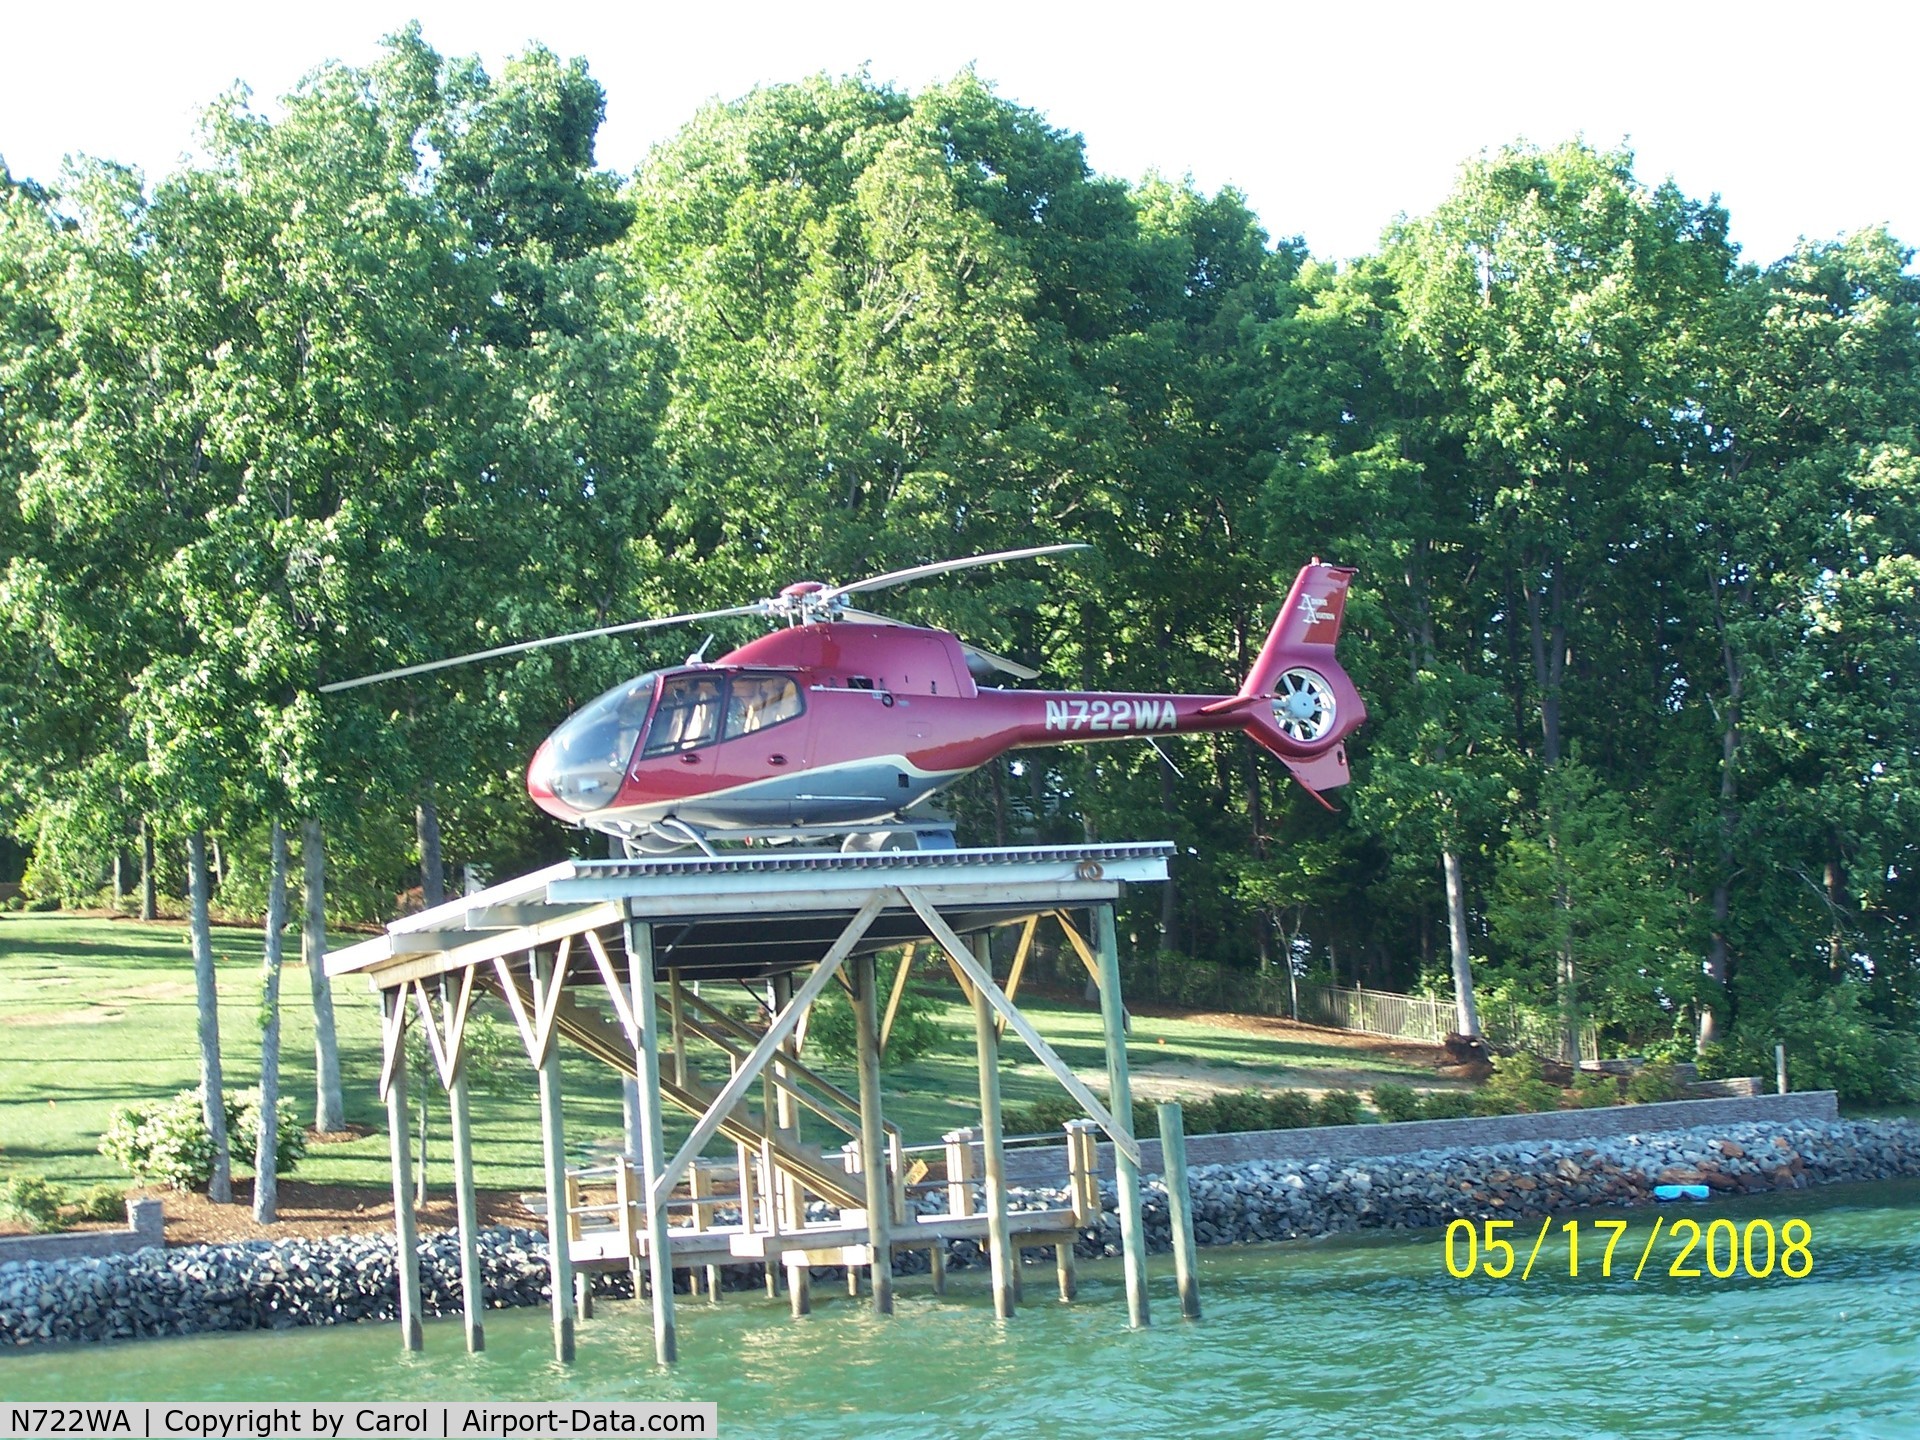 N722WA, 2006 Eurocopter EC-120B Colibri C/N 1465, helicopter and dock taken from water